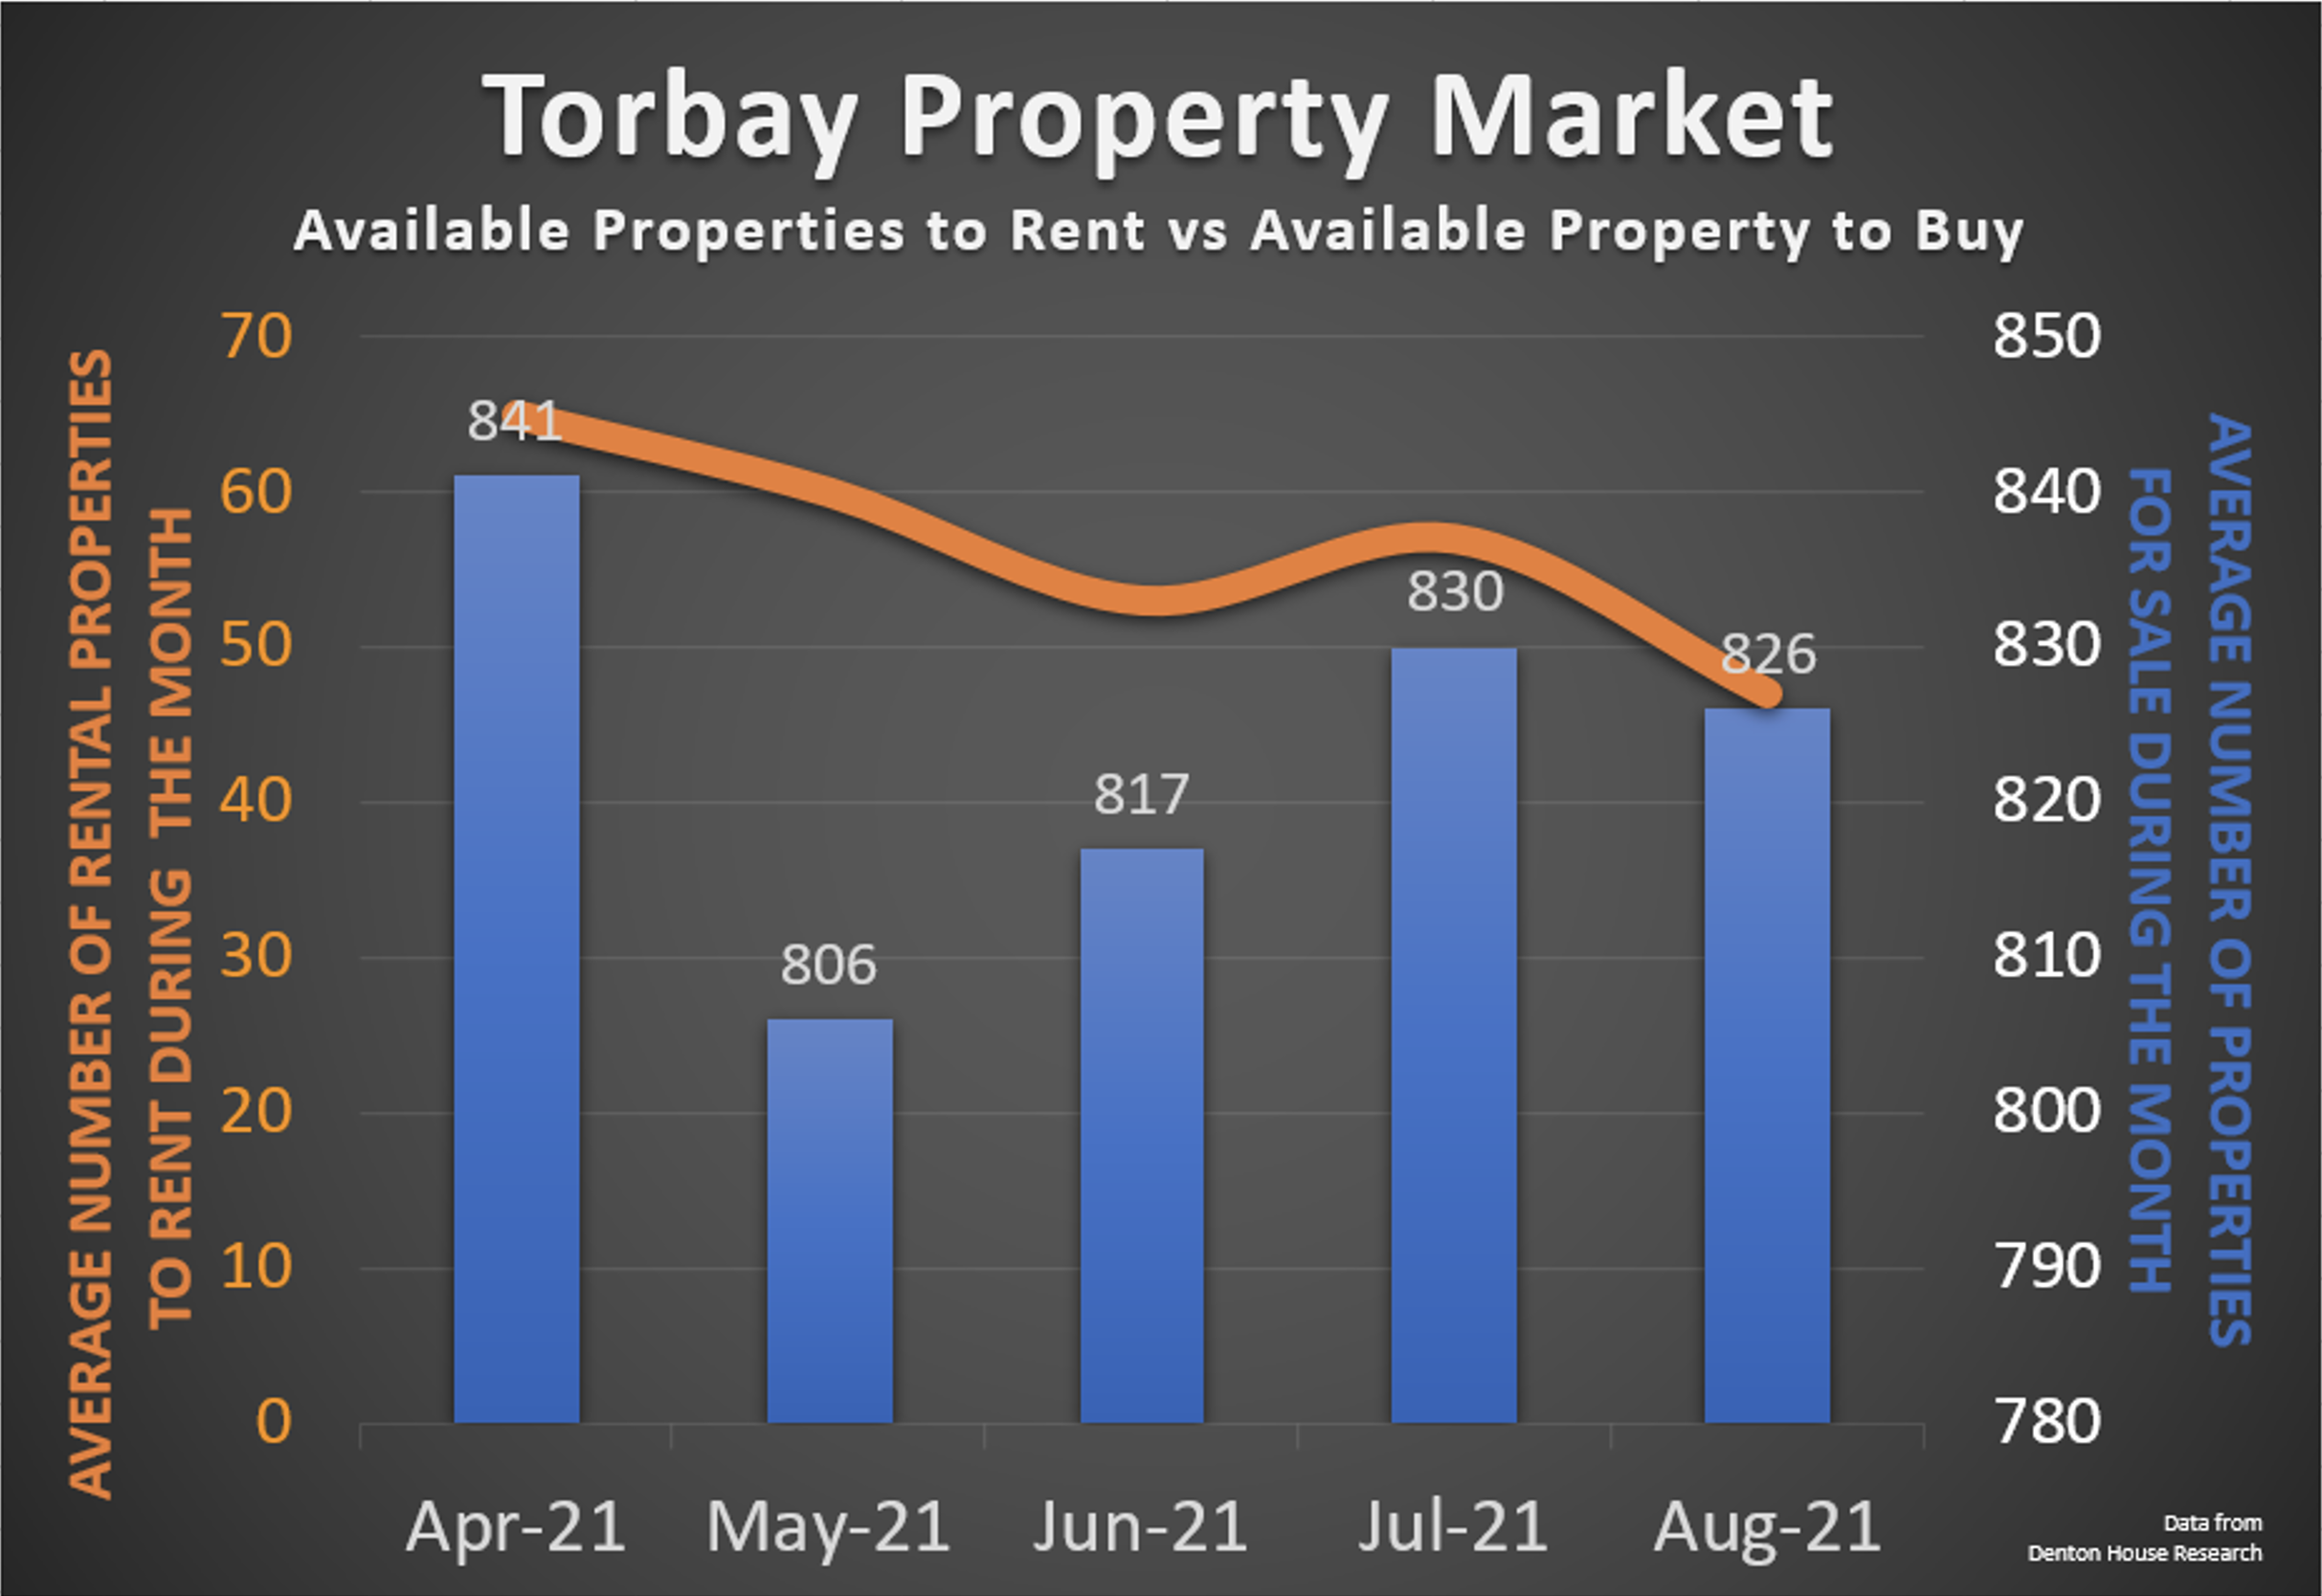 Torbay Homes Asking Prices Up 3% in August